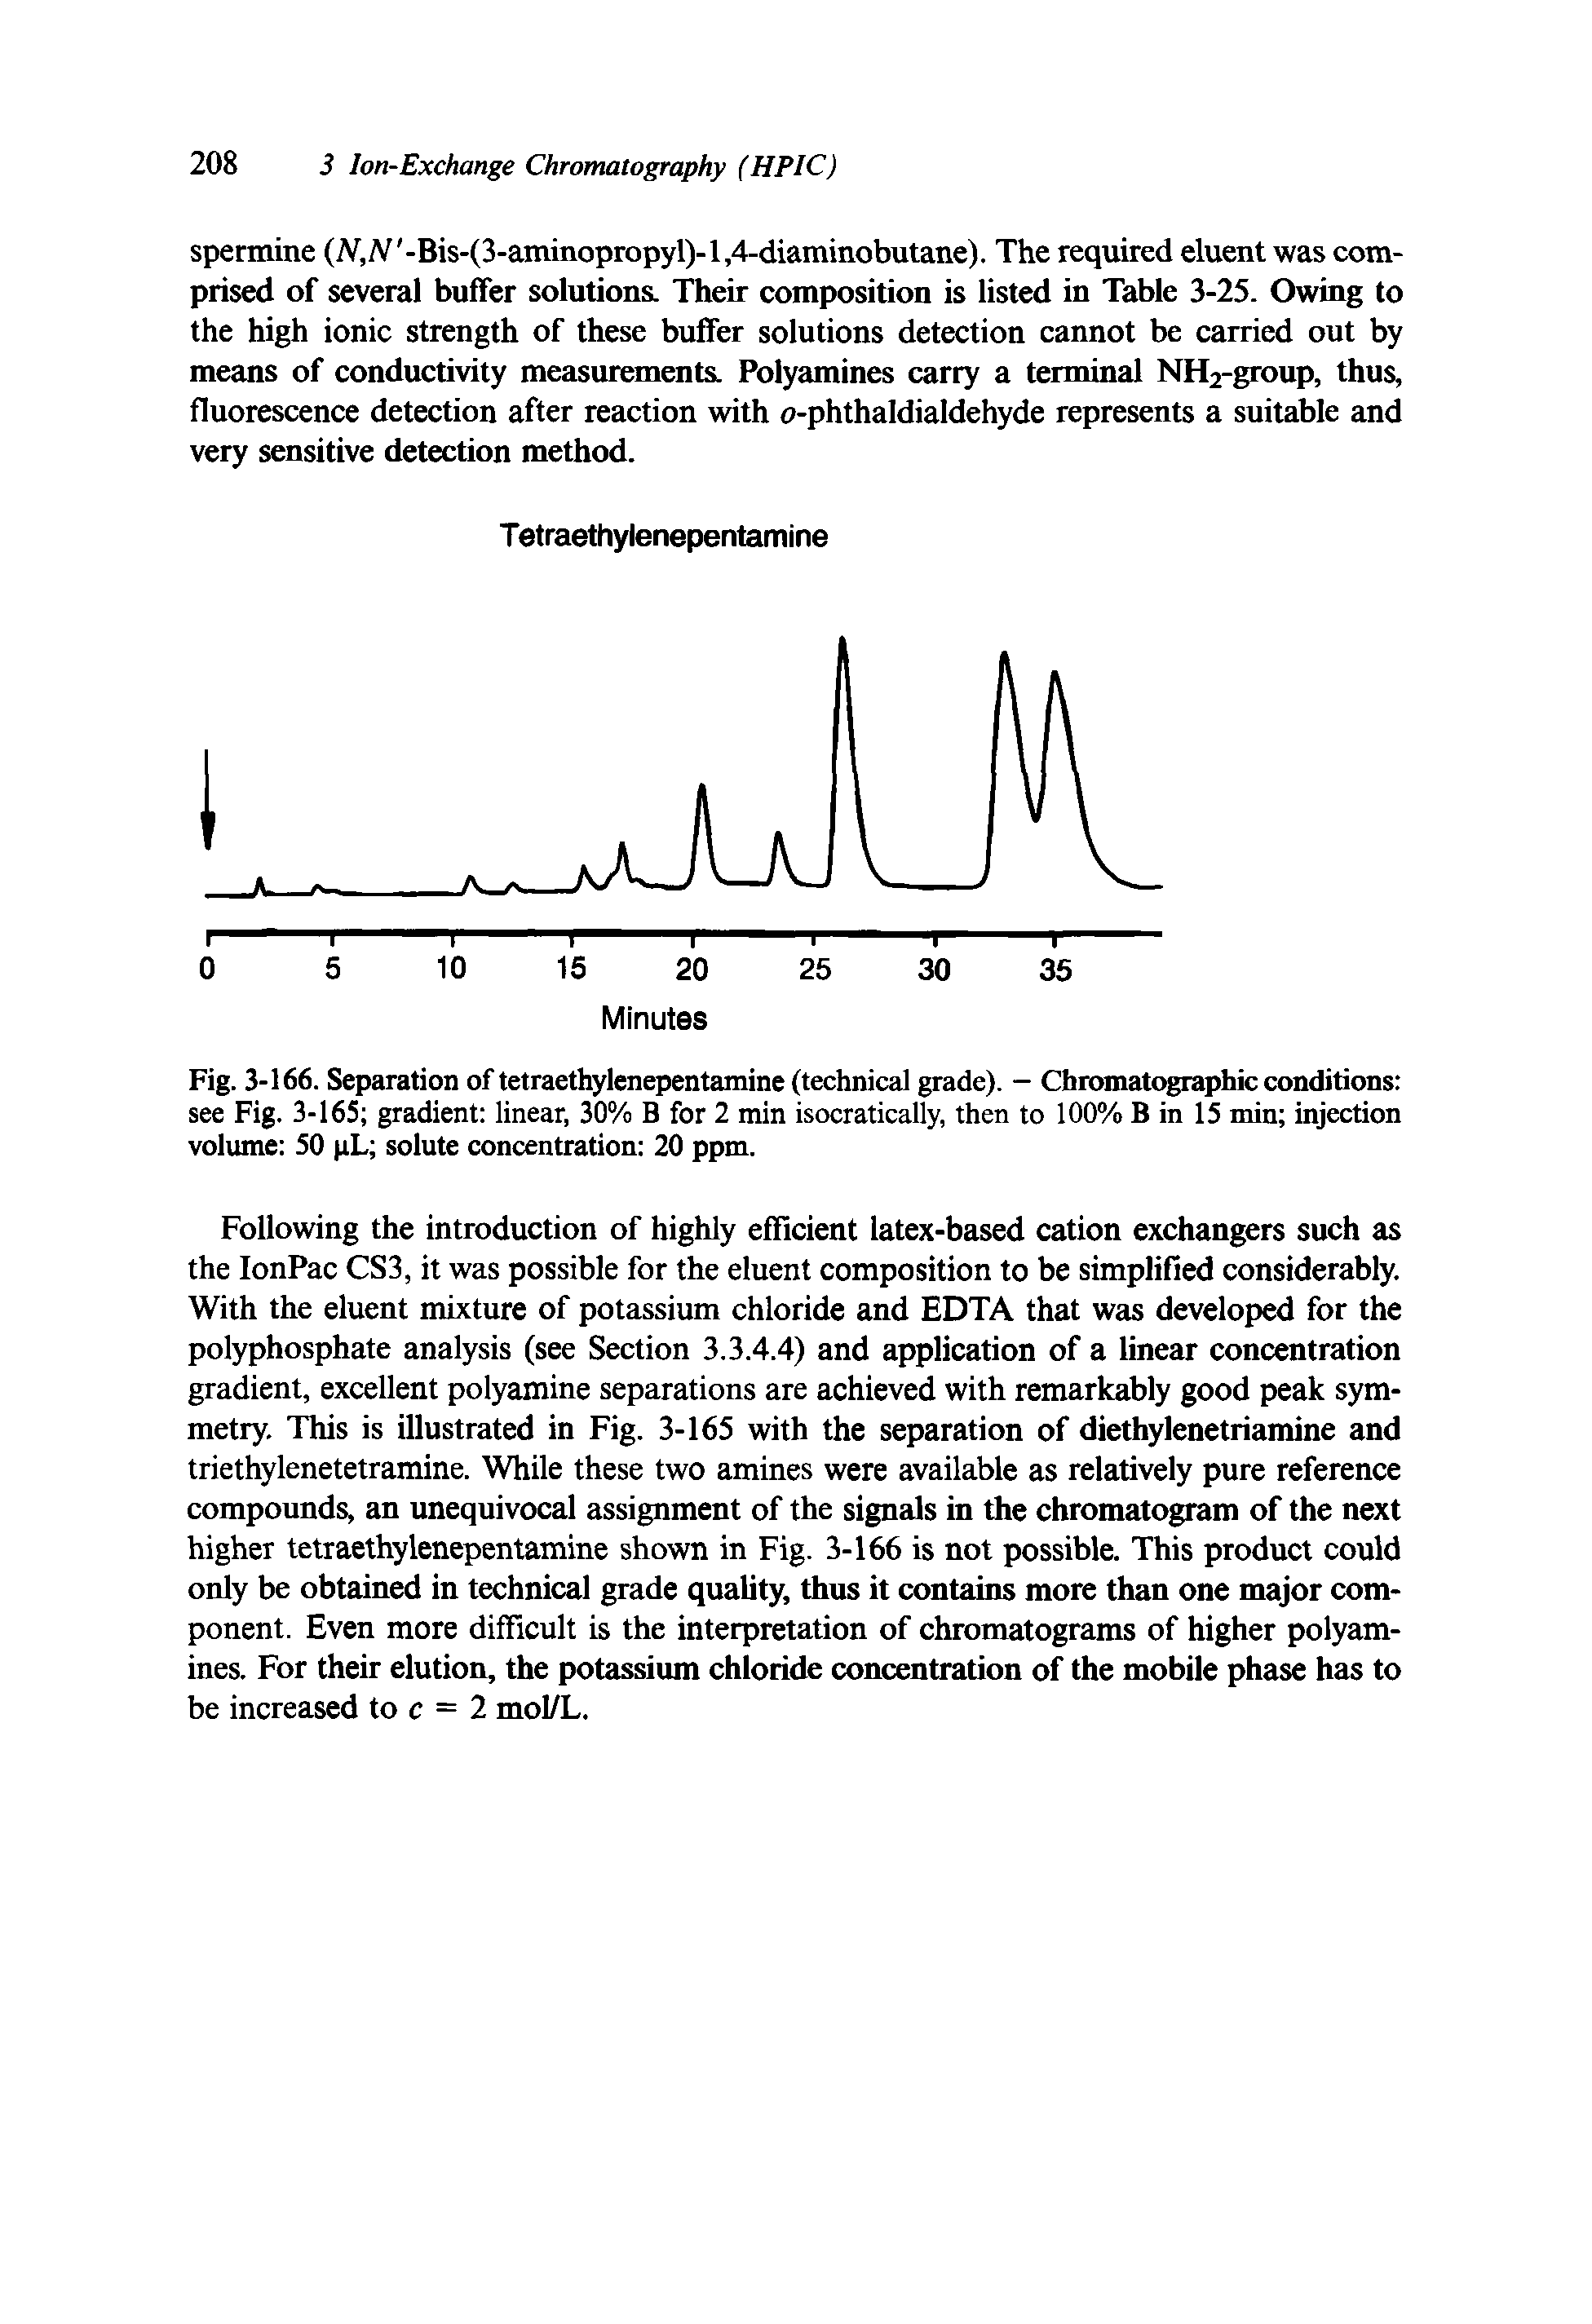 Fig. 3-166. Separation of tetraethylenepentamine (technical grade). - Chromatographic conditions see Fig. 3-165 gradient linear, 30% B for 2 min isocratically, then to 100% B in 15 min injection volume 50 pL solute concentration 20 ppm.